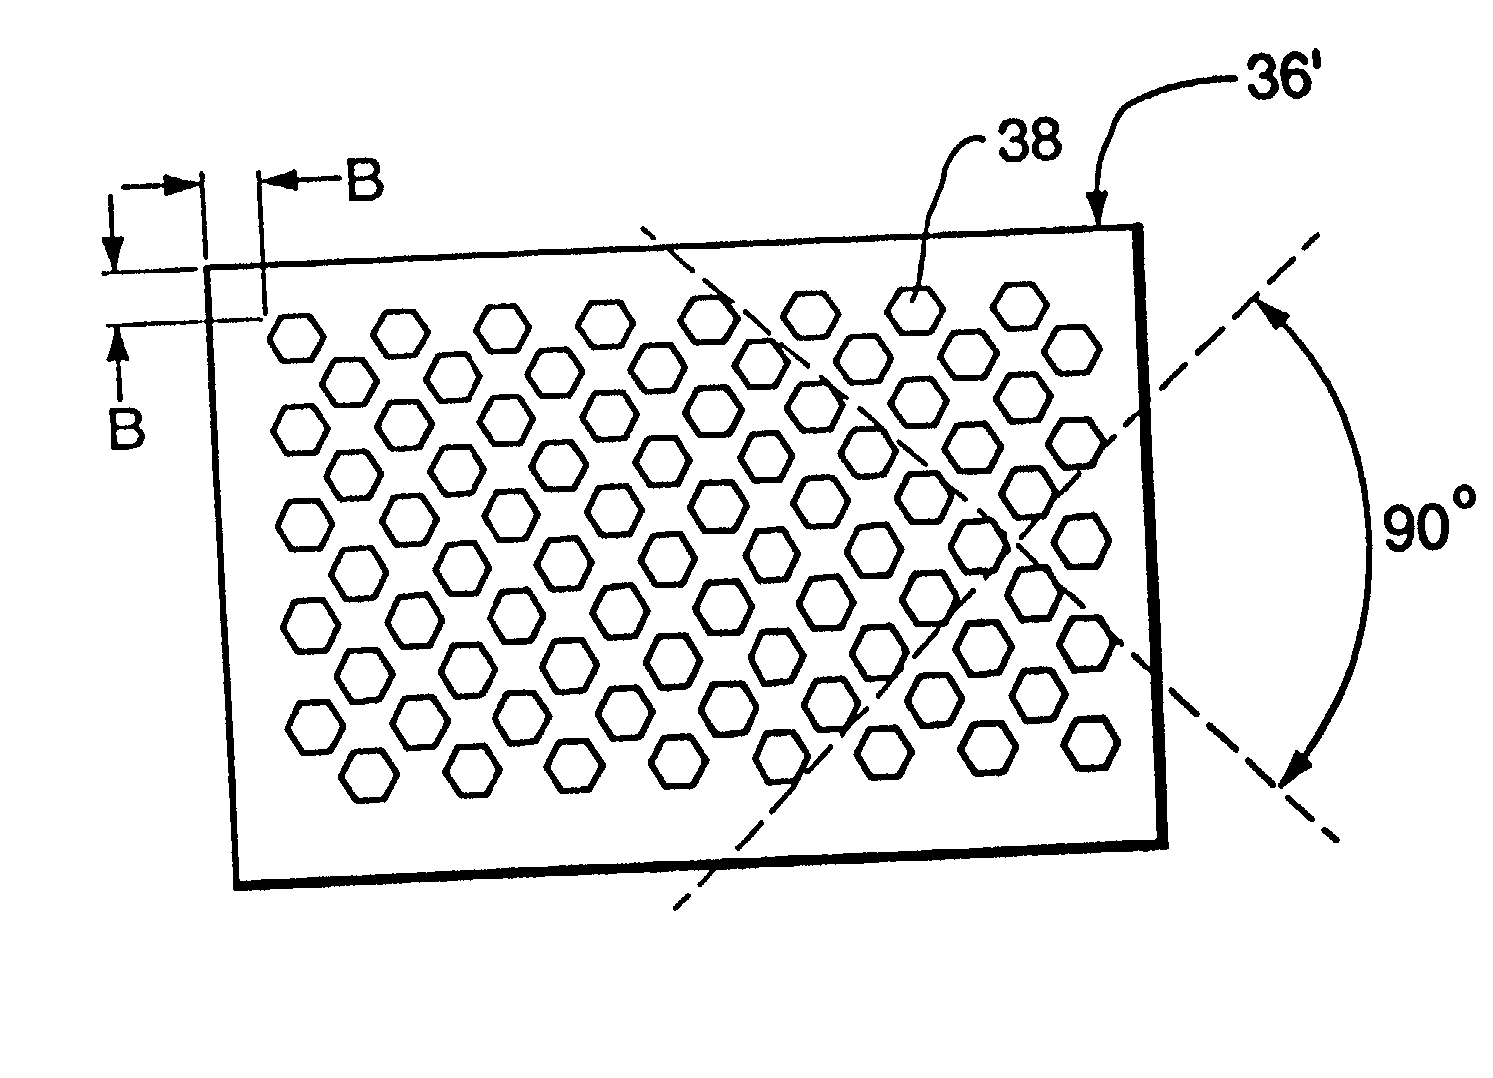 Printing plates containing ink cells in both solid and halftone areas